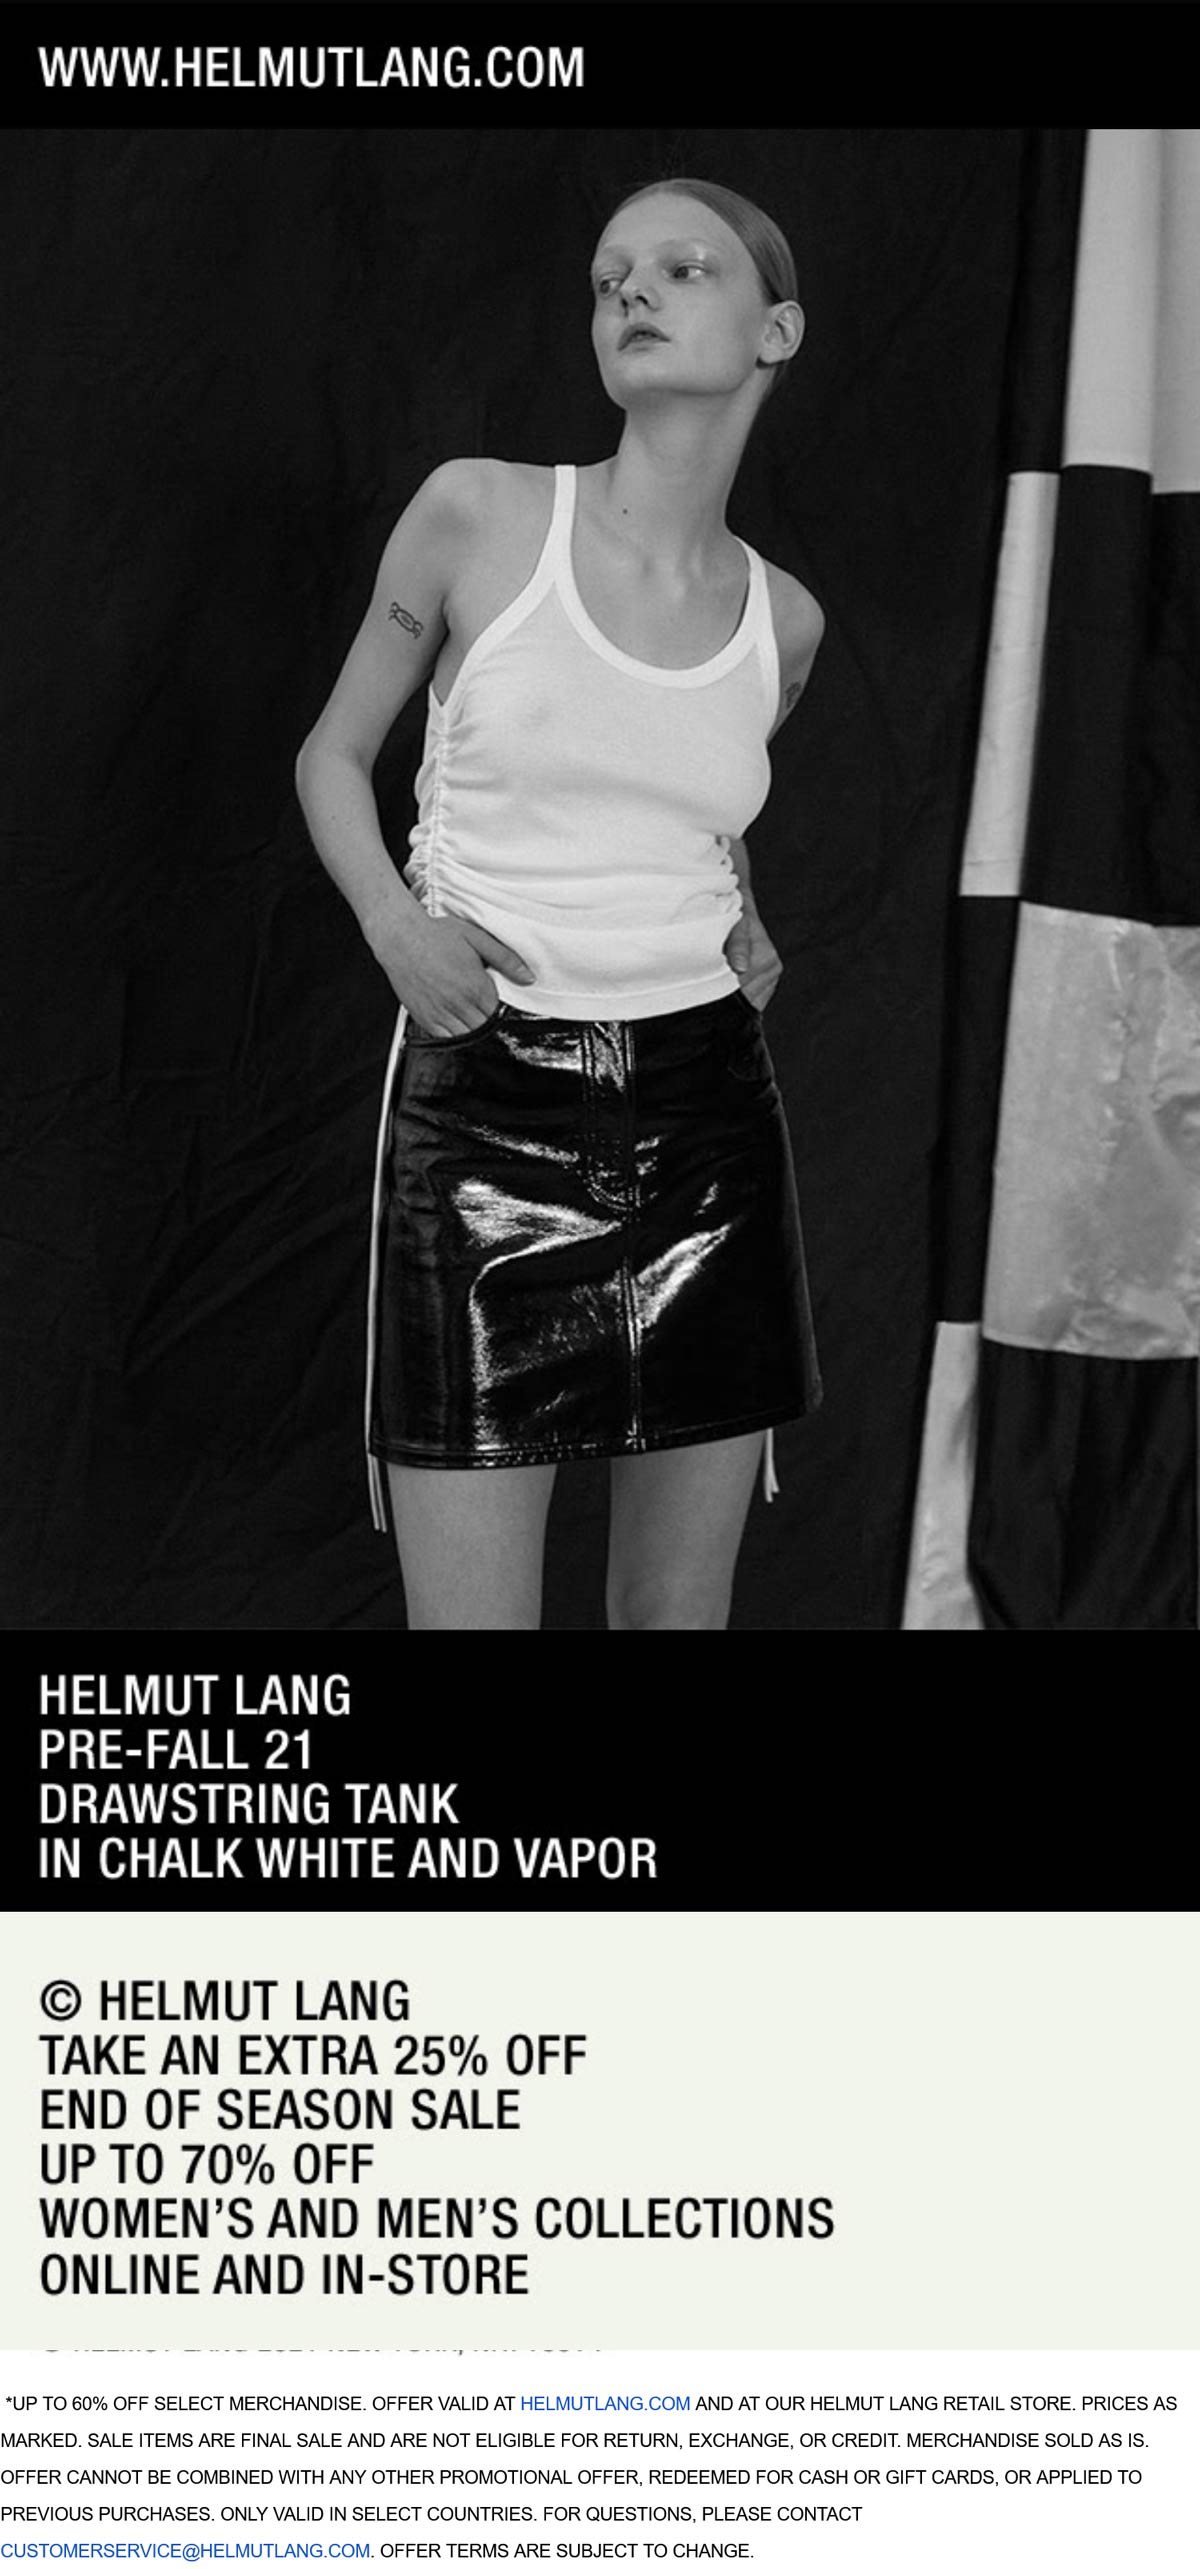 Helmut Lang stores Coupon  Extra 25% off at Helmut Lang, ditto online #helmutlang 